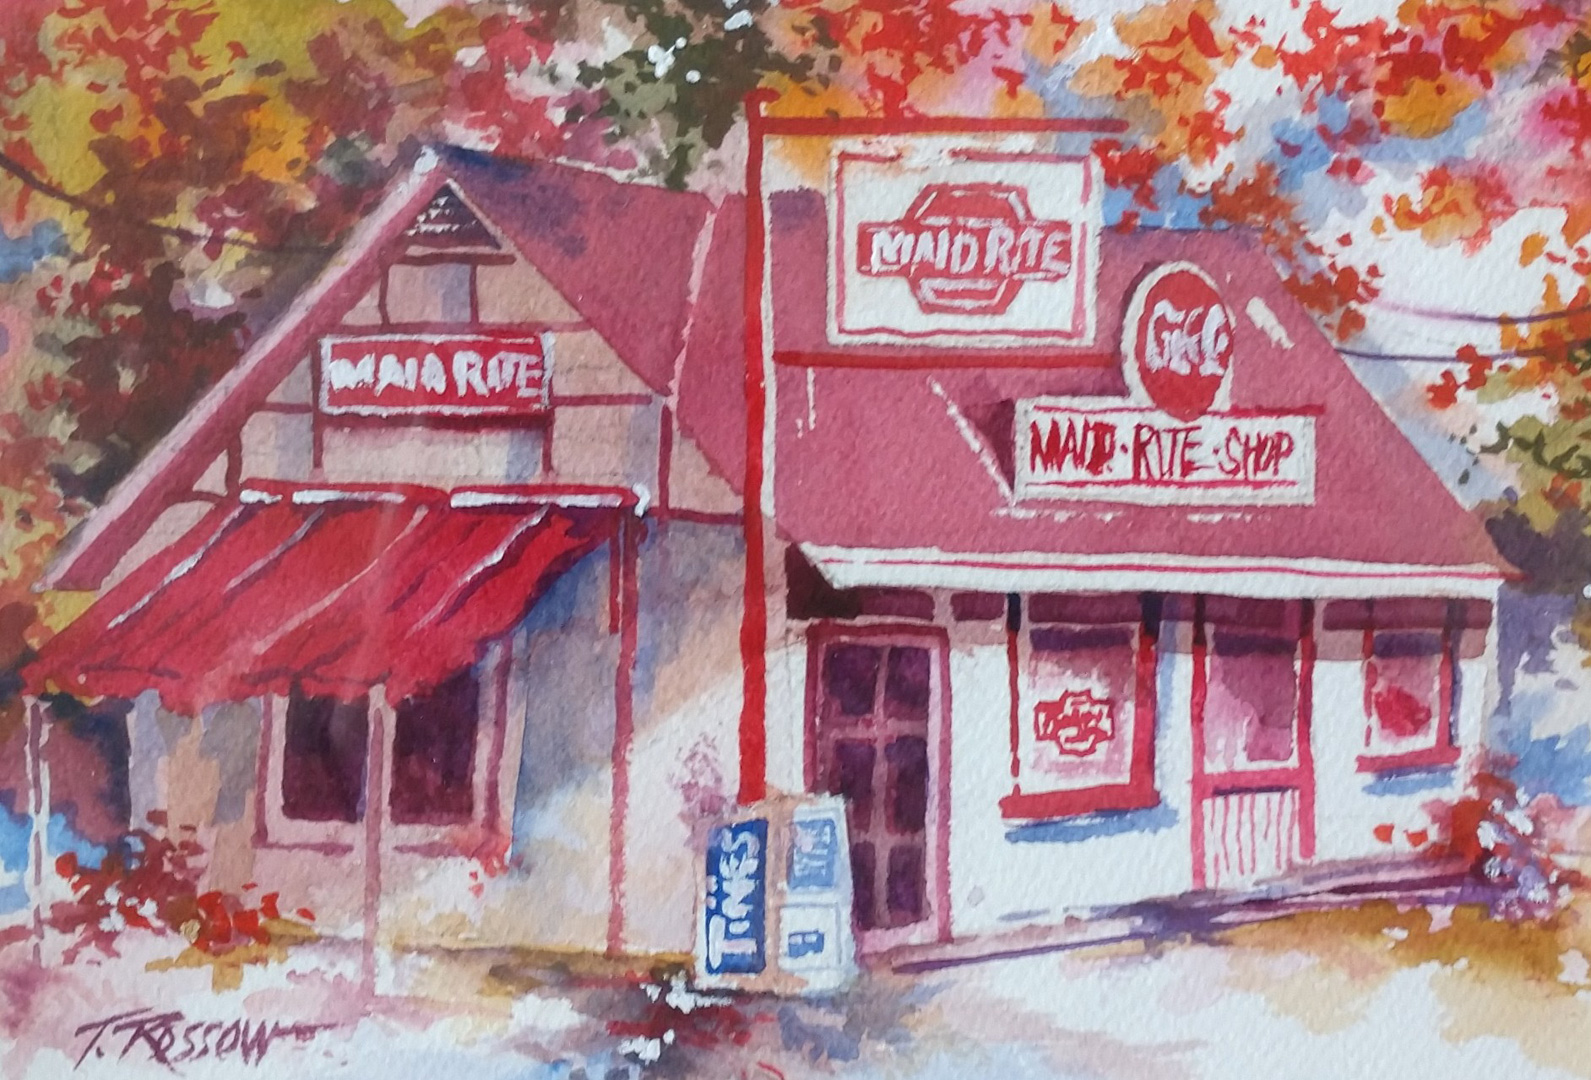 Maid Rite Diner, Watercolor on paper, 8.5 x 6